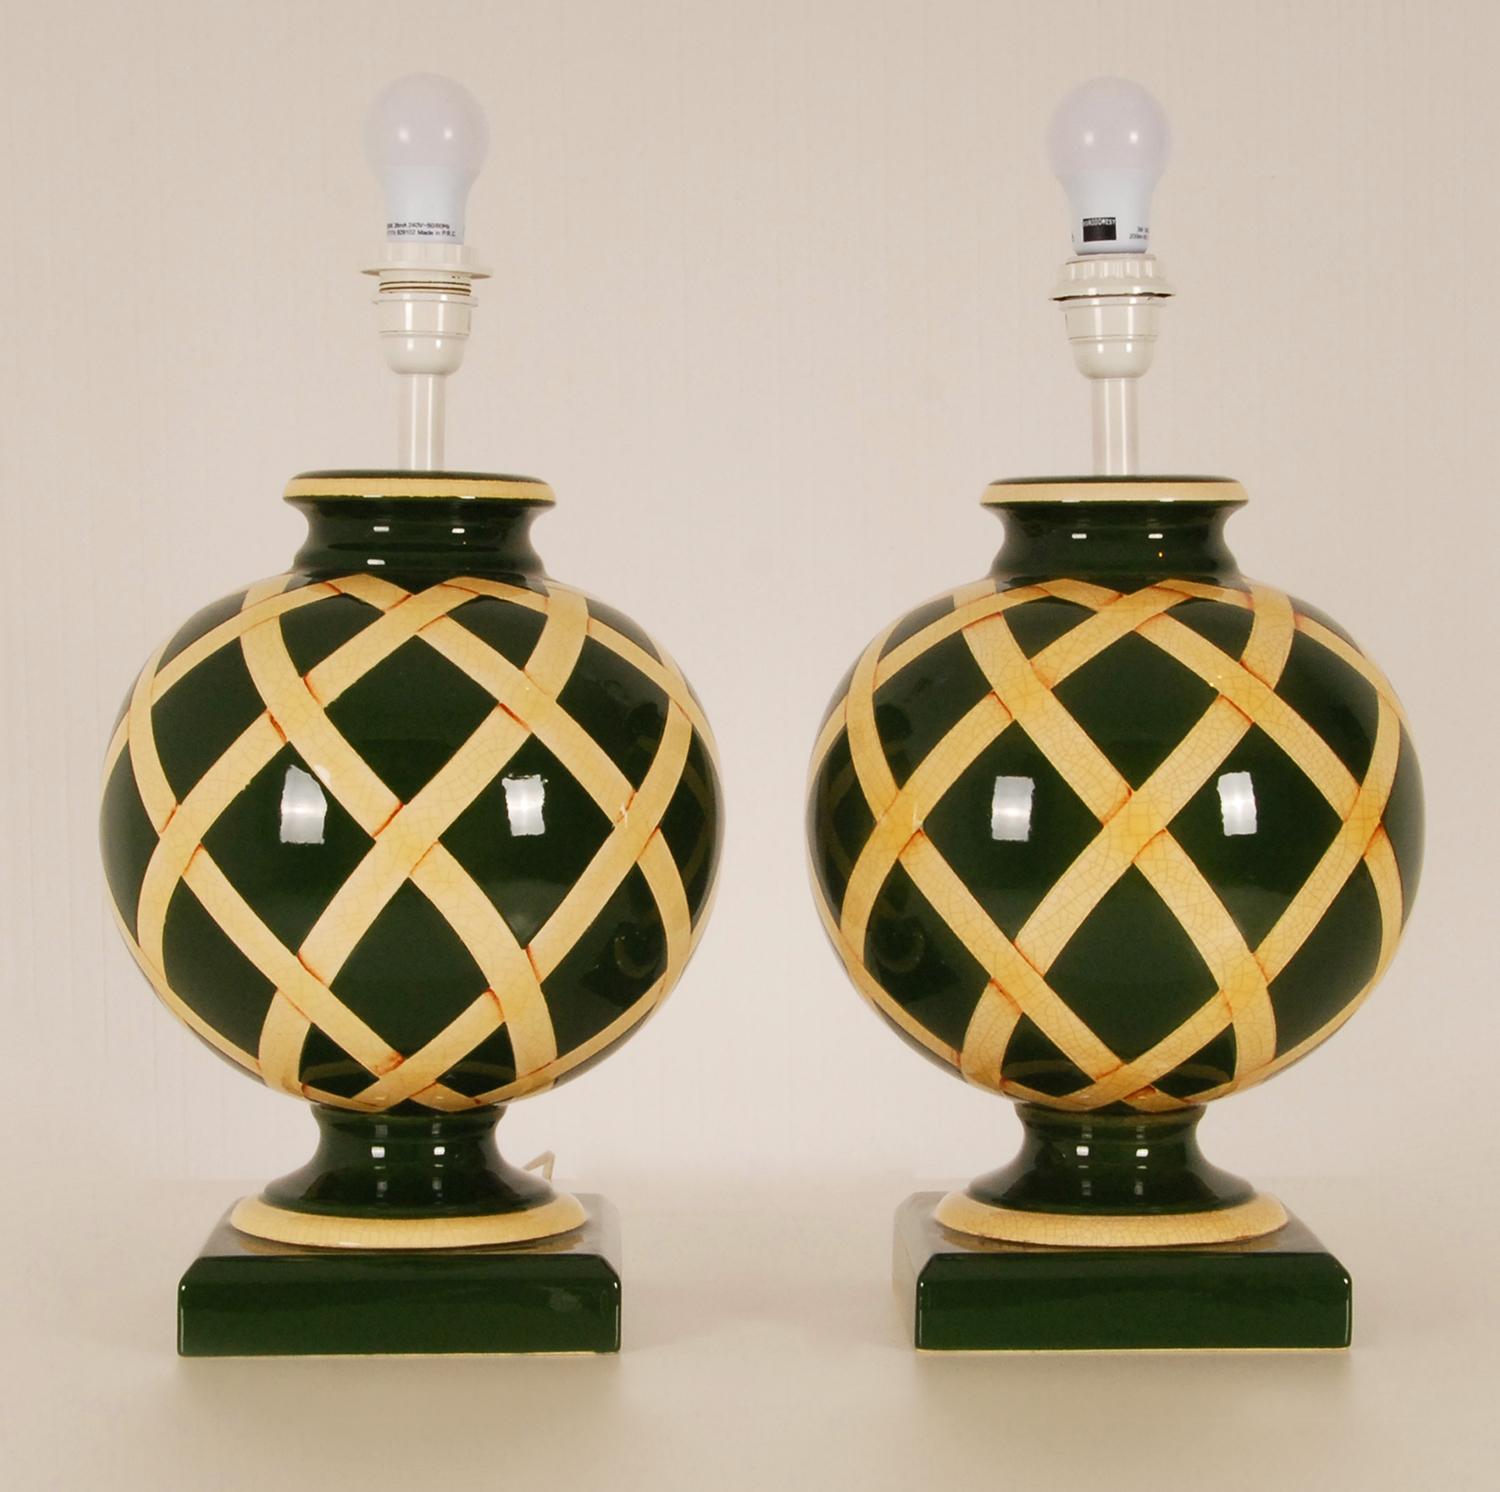 Vintage French Ceramic Vase Table Lamps Green Beige Argyle Pattern, a Pair In Good Condition For Sale In Wommelgem, VAN